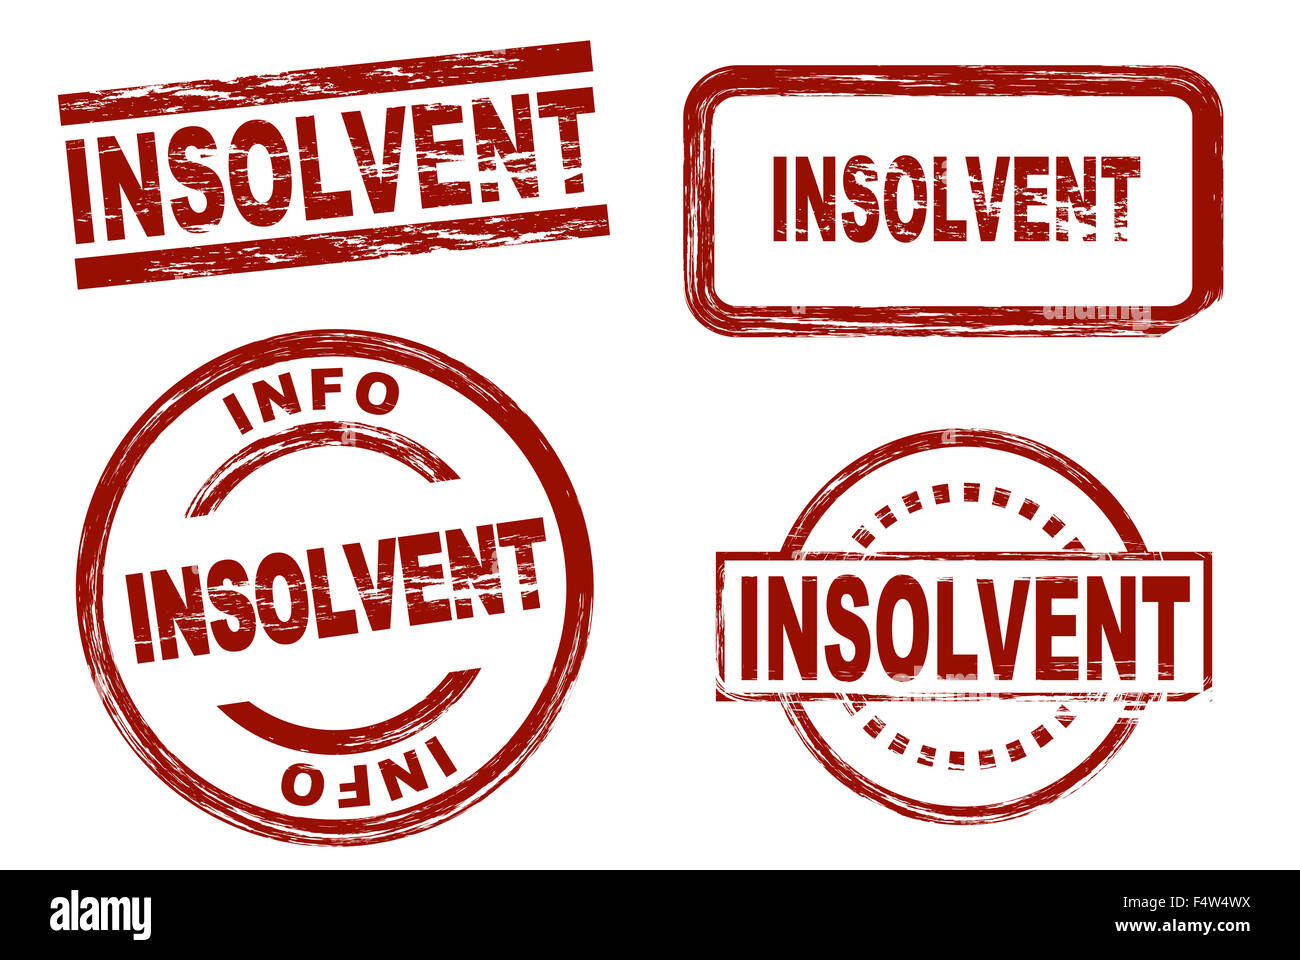 Set of stylized red stamps showing the term insolvent. All on white background. Stock Photo